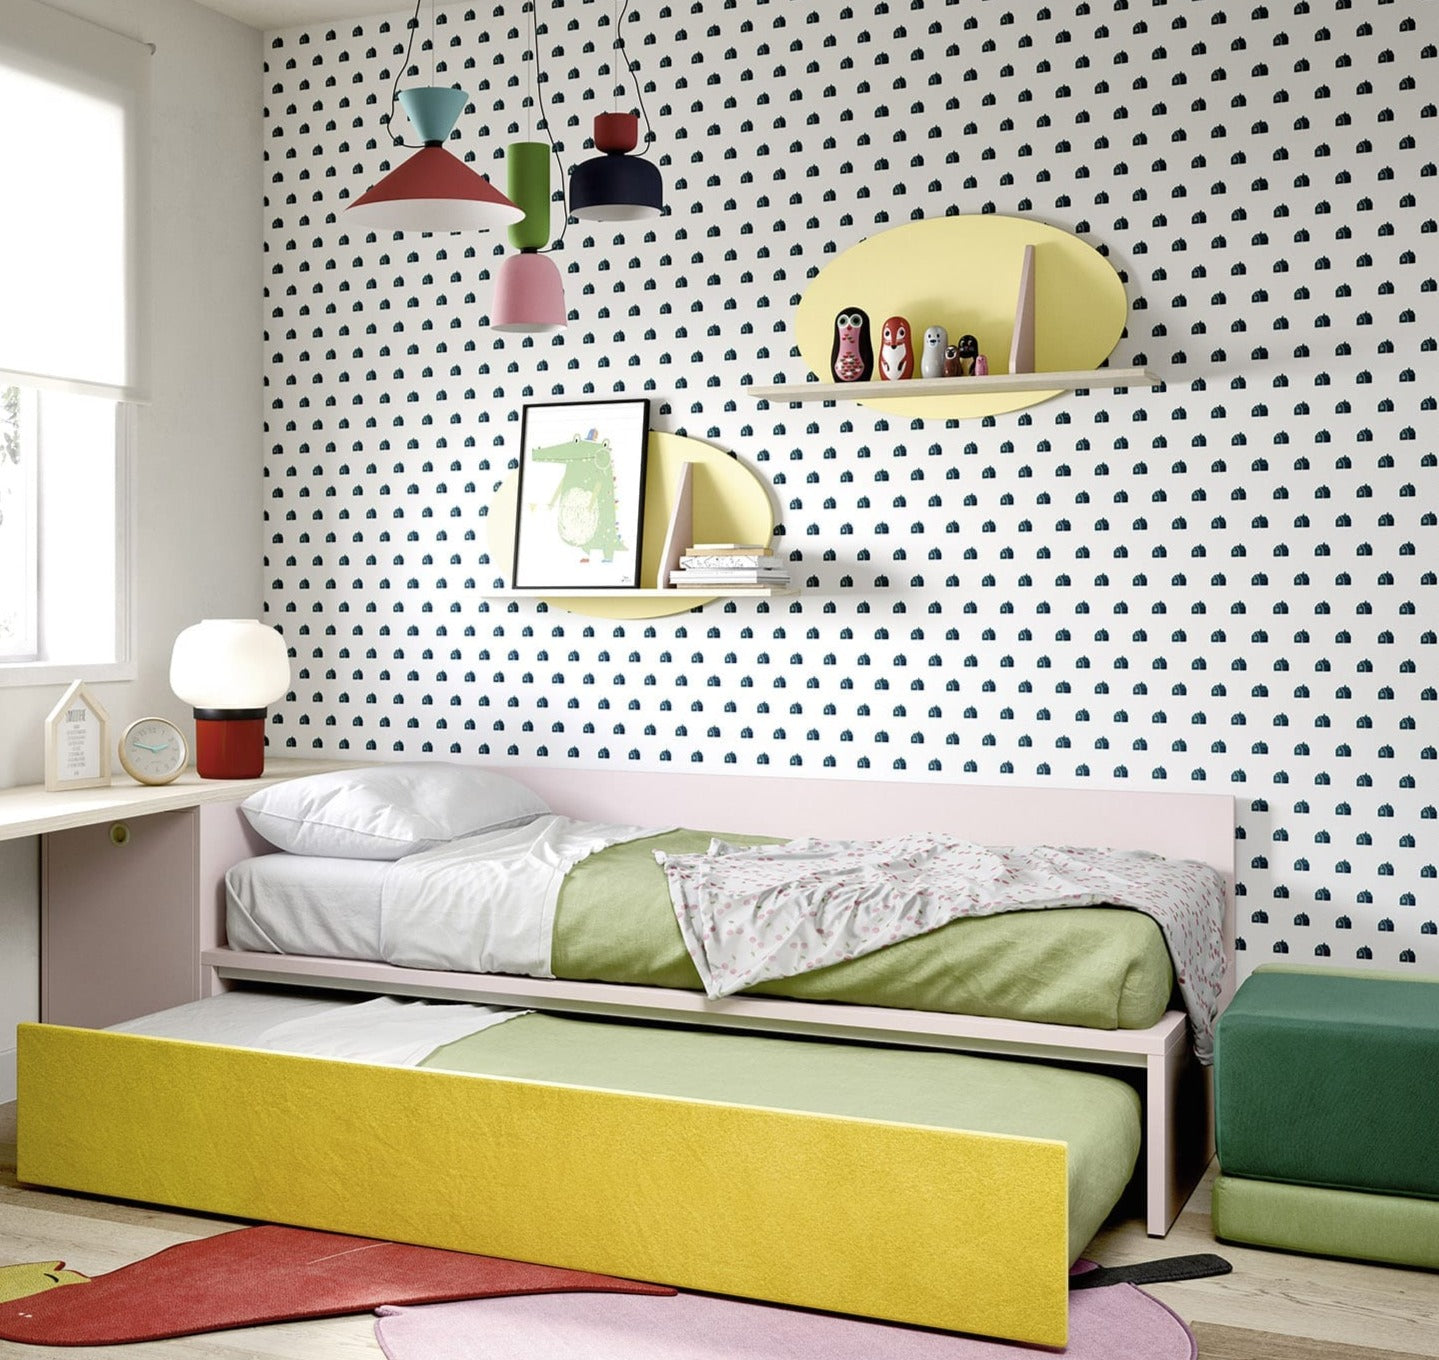 Tipo B Children’s Bed by Nidi of Batistella